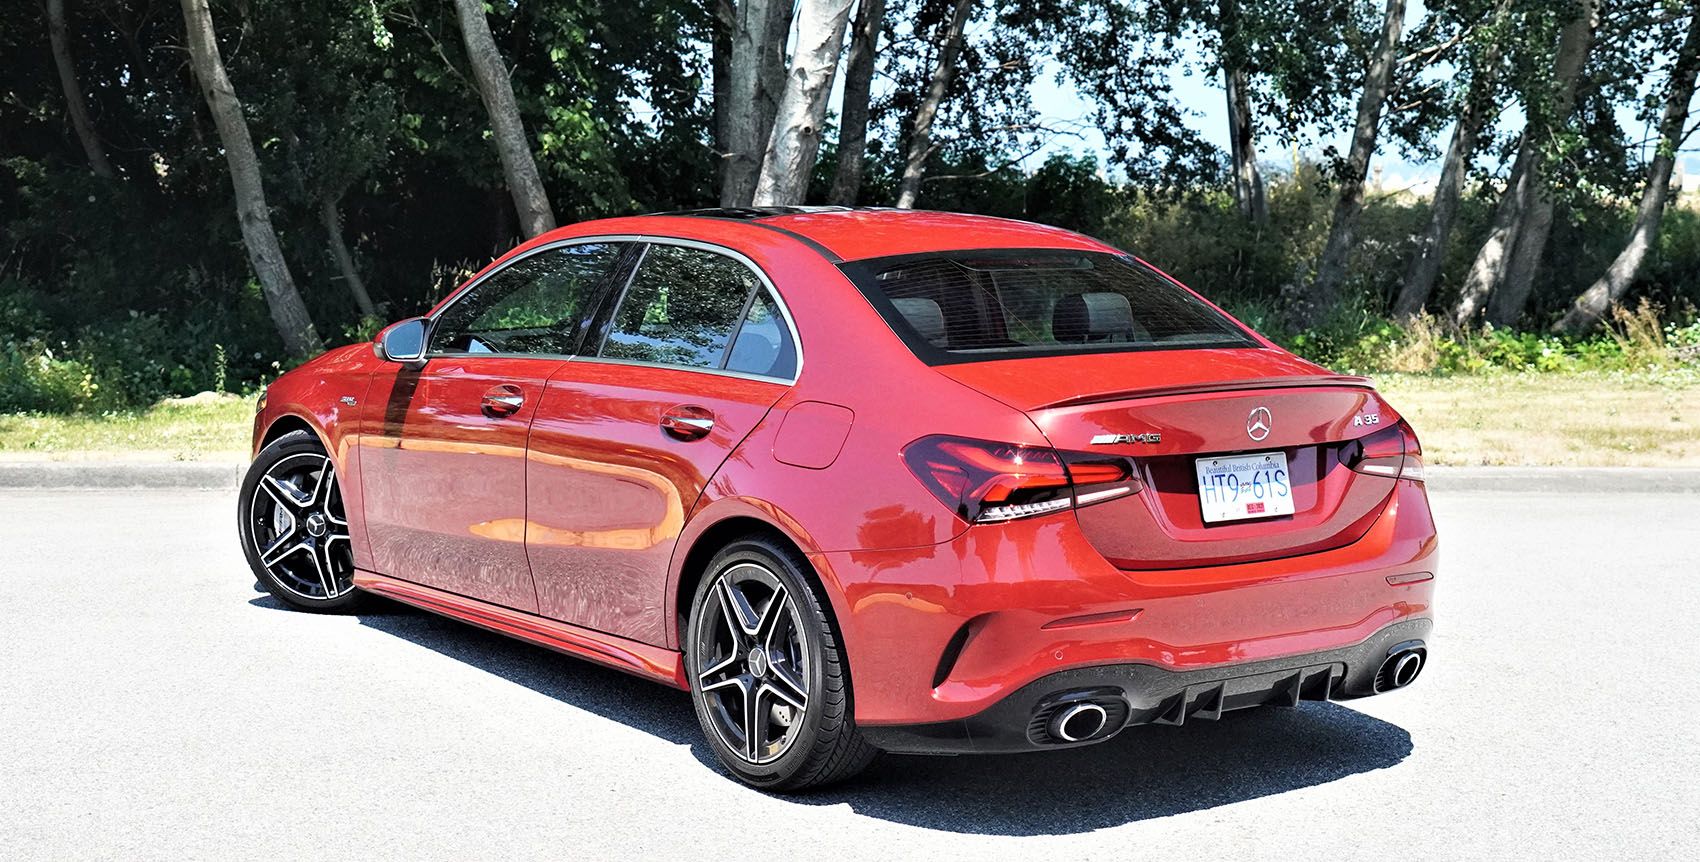 The 2021 Mercedes-AMG A35 4Matic Sedan as seen from its rear three-quarter view.